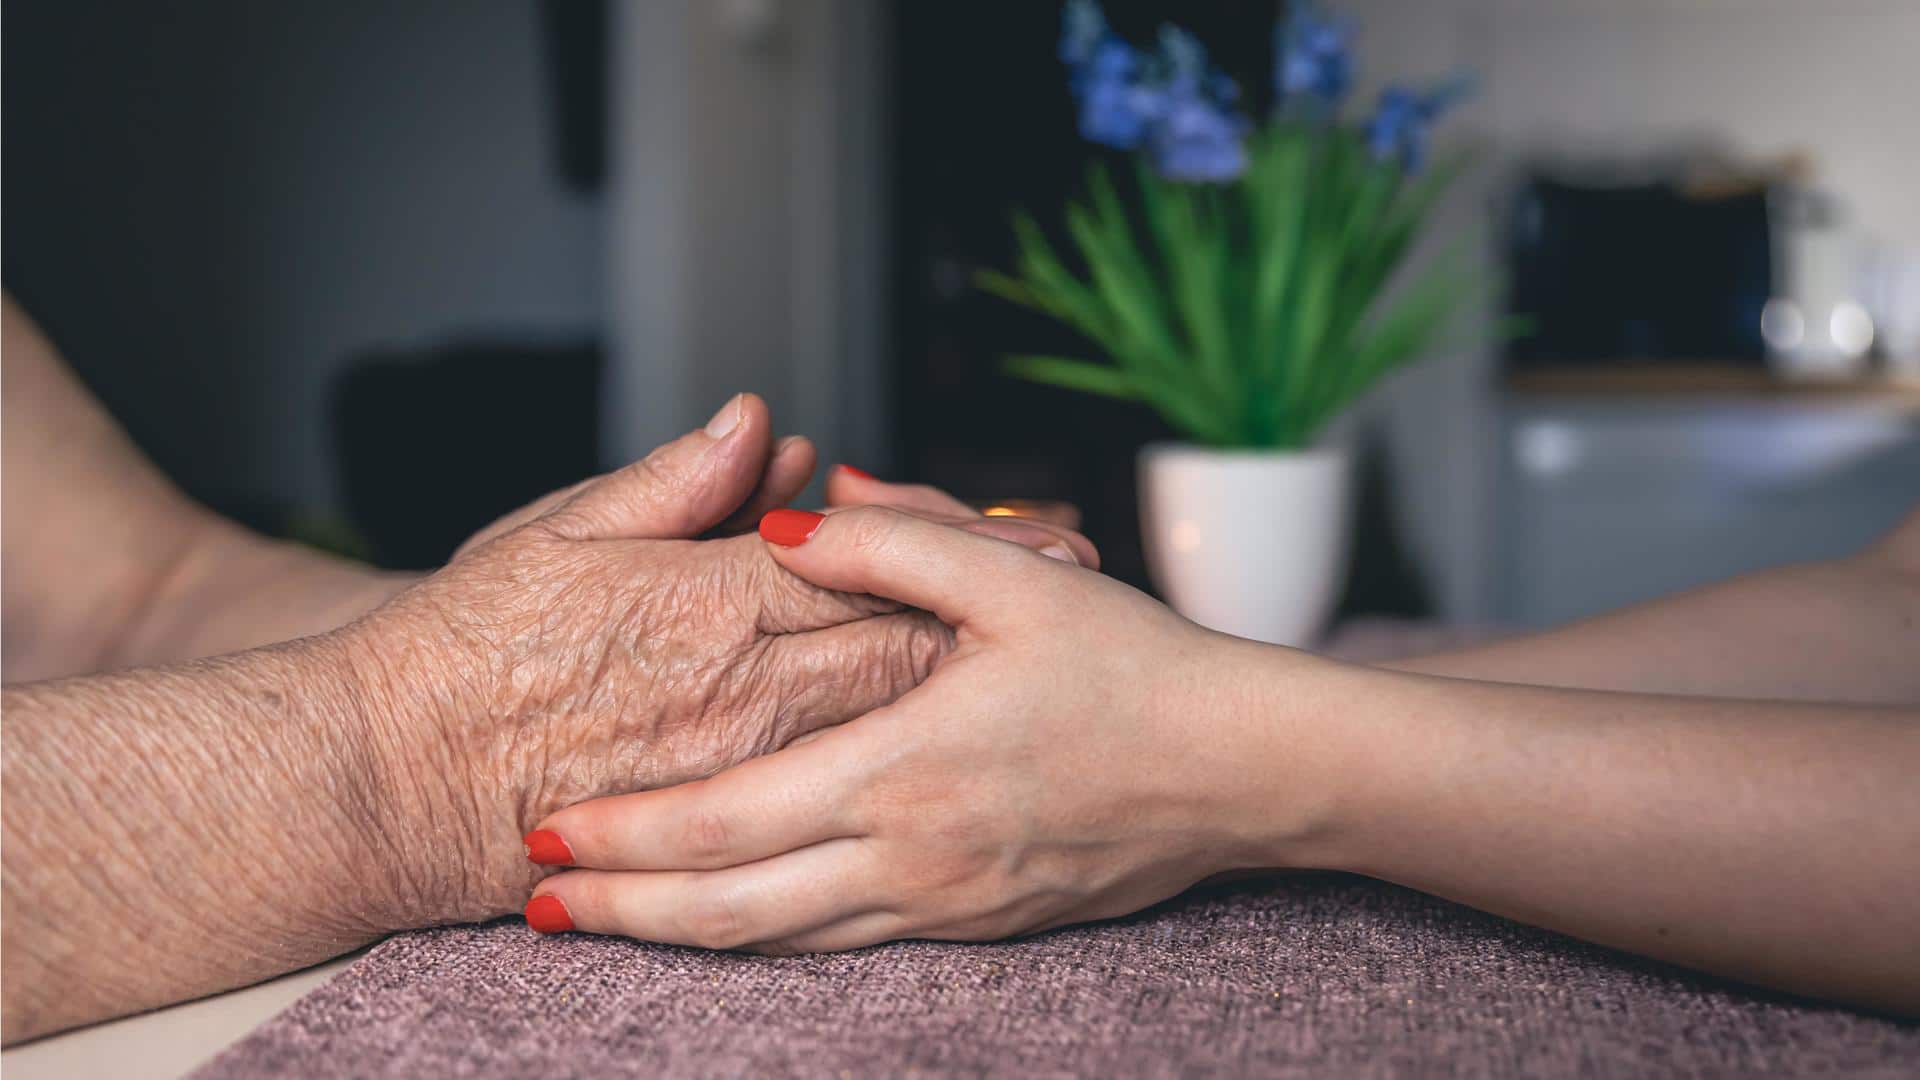 Five tips to help you care for someone with dementia